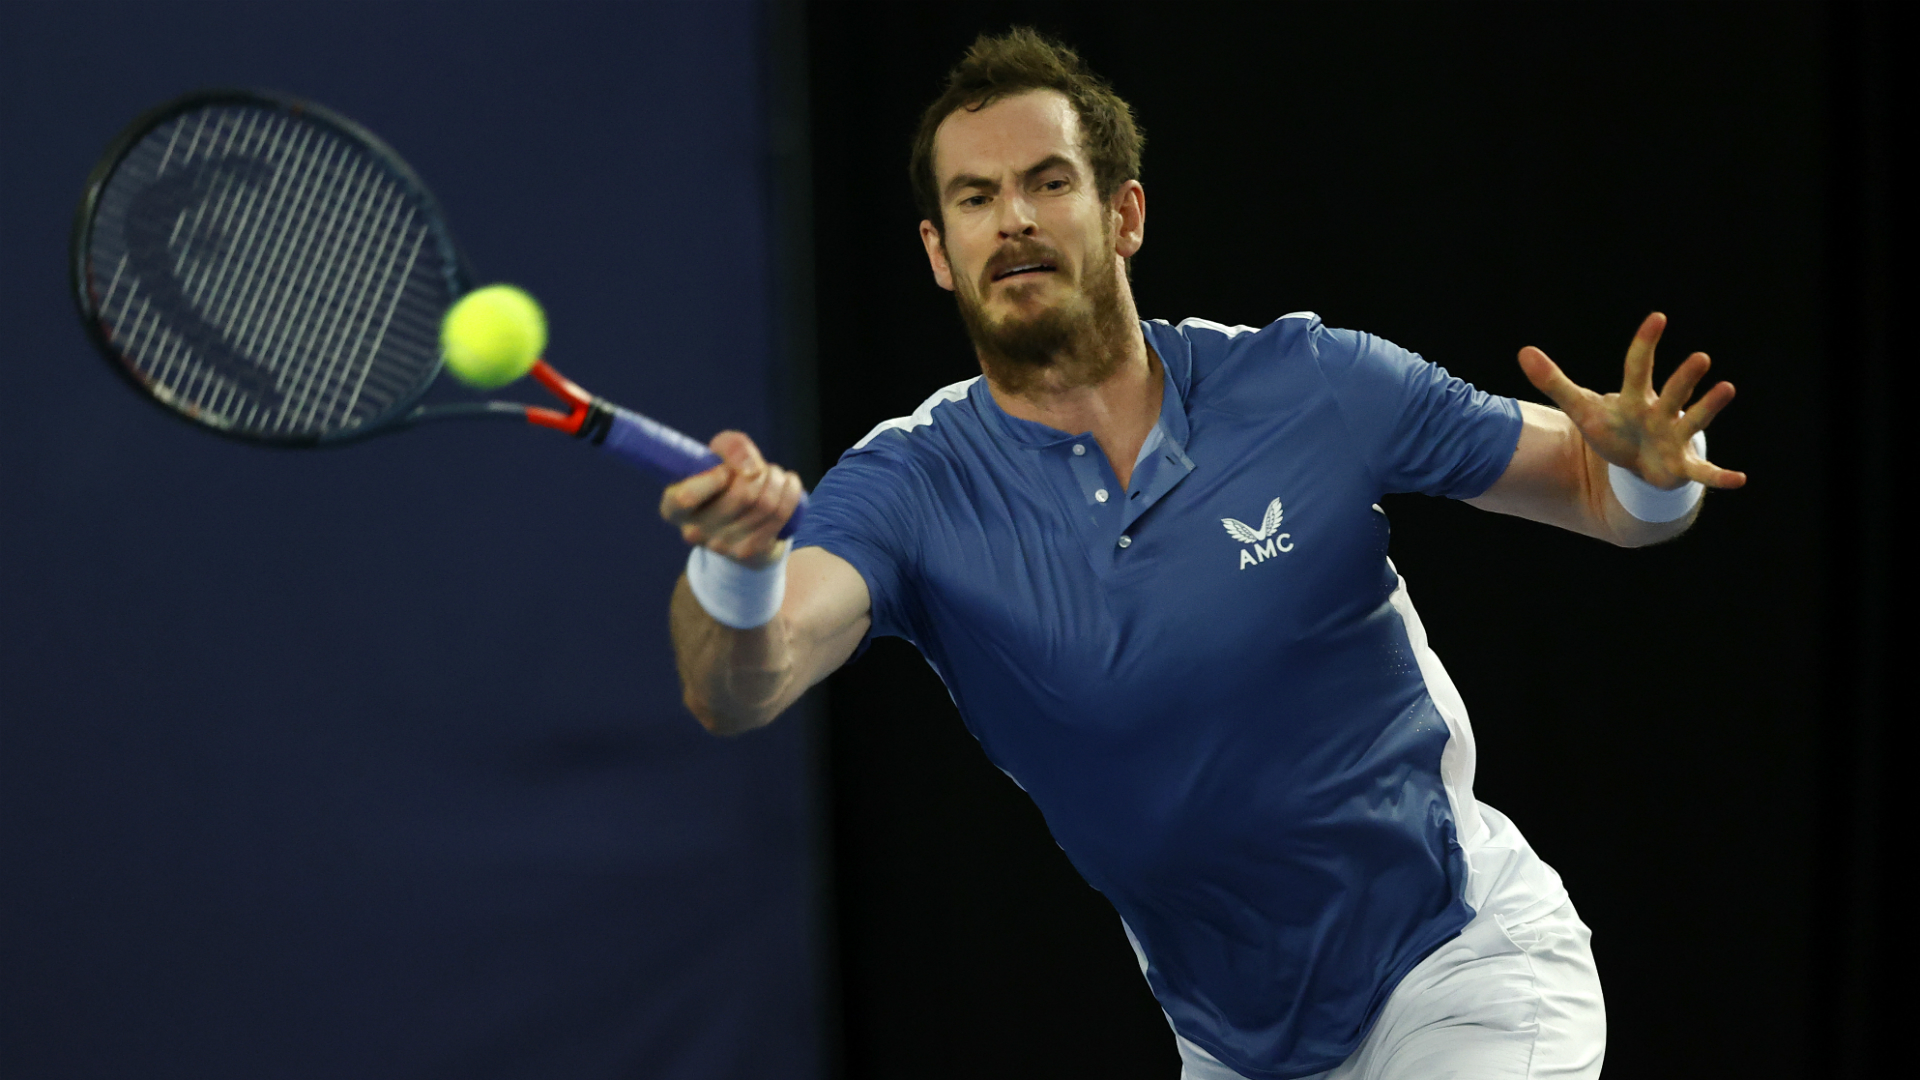 Andy Murray: Wildcard at the Australian Open after return at